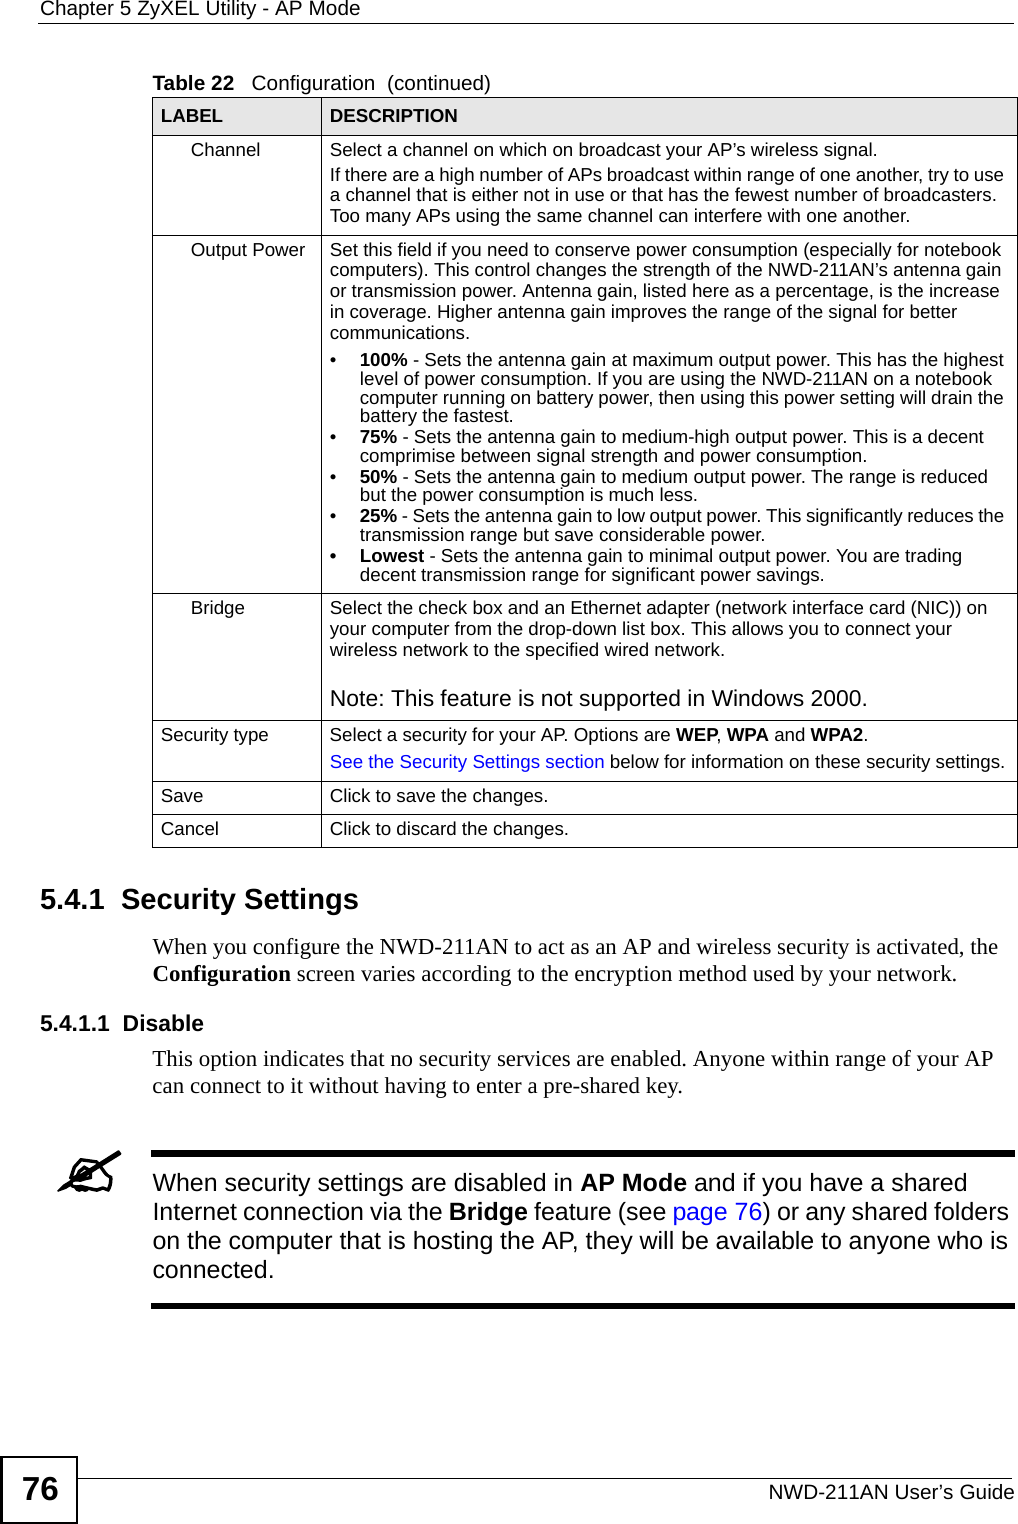 Chapter 5 ZyXEL Utility - AP ModeNWD-211AN User’s Guide765.4.1  Security Settings When you configure the NWD-211AN to act as an AP and wireless security is activated, the Configuration screen varies according to the encryption method used by your network.5.4.1.1  DisableThis option indicates that no security services are enabled. Anyone within range of your AP can connect to it without having to enter a pre-shared key. &quot;When security settings are disabled in AP Mode and if you have a shared Internet connection via the Bridge feature (see page 76) or any shared folders on the computer that is hosting the AP, they will be available to anyone who is connected. Channel Select a channel on which on broadcast your AP’s wireless signal.If there are a high number of APs broadcast within range of one another, try to use a channel that is either not in use or that has the fewest number of broadcasters. Too many APs using the same channel can interfere with one another.Output Power Set this field if you need to conserve power consumption (especially for notebook computers). This control changes the strength of the NWD-211AN’s antenna gain or transmission power. Antenna gain, listed here as a percentage, is the increase in coverage. Higher antenna gain improves the range of the signal for better communications.•100% - Sets the antenna gain at maximum output power. This has the highest level of power consumption. If you are using the NWD-211AN on a notebook computer running on battery power, then using this power setting will drain the battery the fastest.•75% - Sets the antenna gain to medium-high output power. This is a decent comprimise between signal strength and power consumption.•50% - Sets the antenna gain to medium output power. The range is reduced but the power consumption is much less.•25% - Sets the antenna gain to low output power. This significantly reduces the transmission range but save considerable power.• Lowest - Sets the antenna gain to minimal output power. You are trading decent transmission range for significant power savings.Bridge  Select the check box and an Ethernet adapter (network interface card (NIC)) on your computer from the drop-down list box. This allows you to connect your wireless network to the specified wired network.Note: This feature is not supported in Windows 2000.Security type Select a security for your AP. Options are WEP, WPA and WPA2.See the Security Settings section below for information on these security settings.Save Click to save the changes.Cancel Click to discard the changes.Table 22   Configuration  (continued)LABEL DESCRIPTION